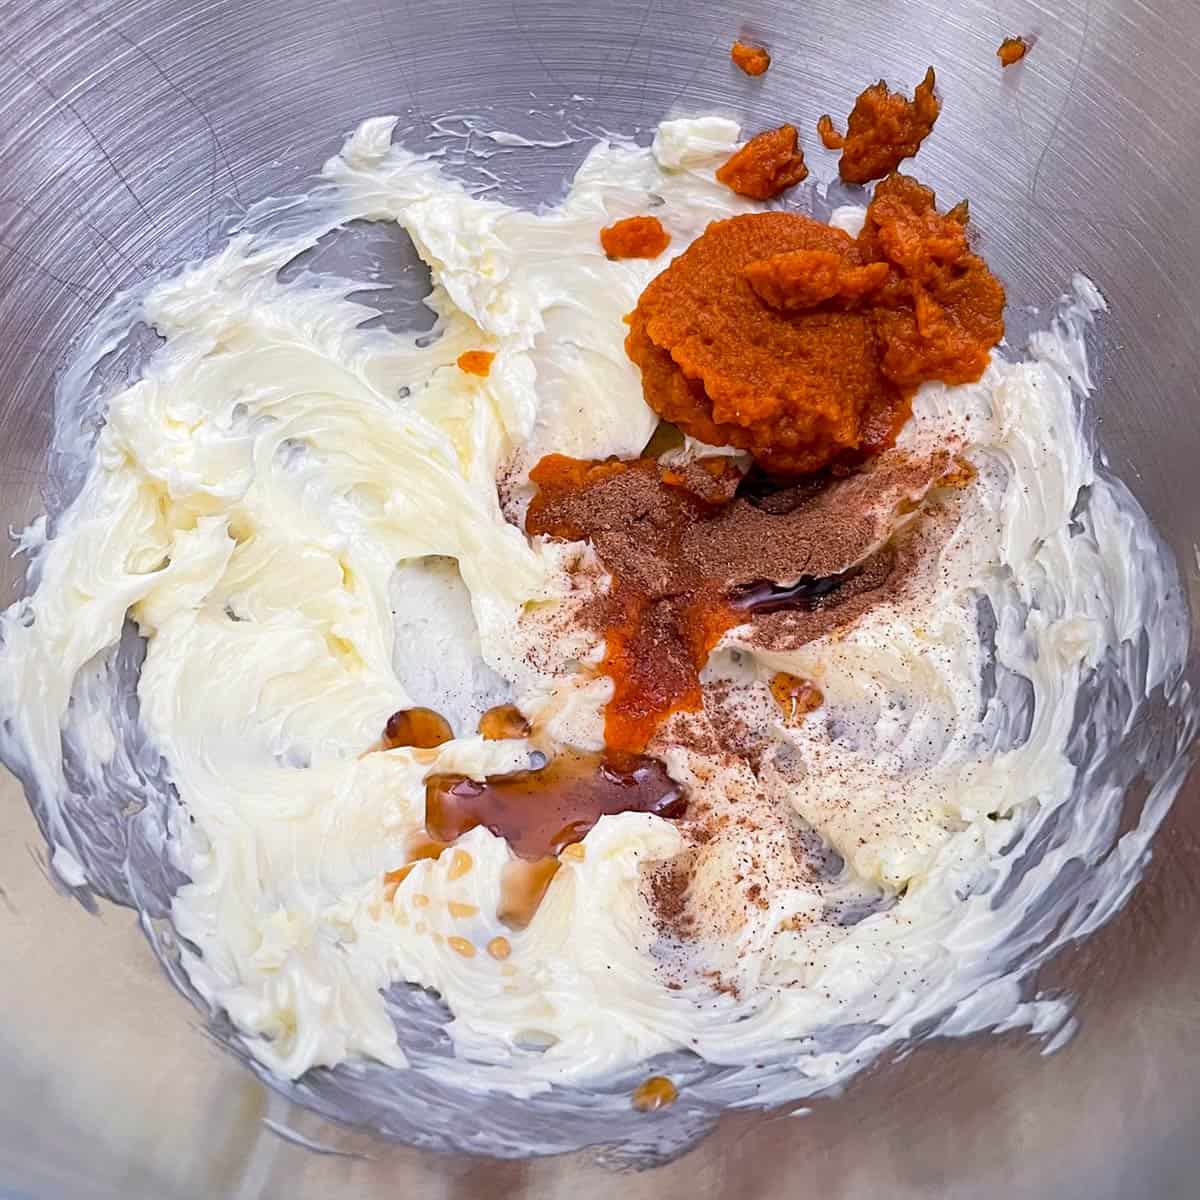 All the ingredients put into the mixer bowl for the pumpkin frosting.